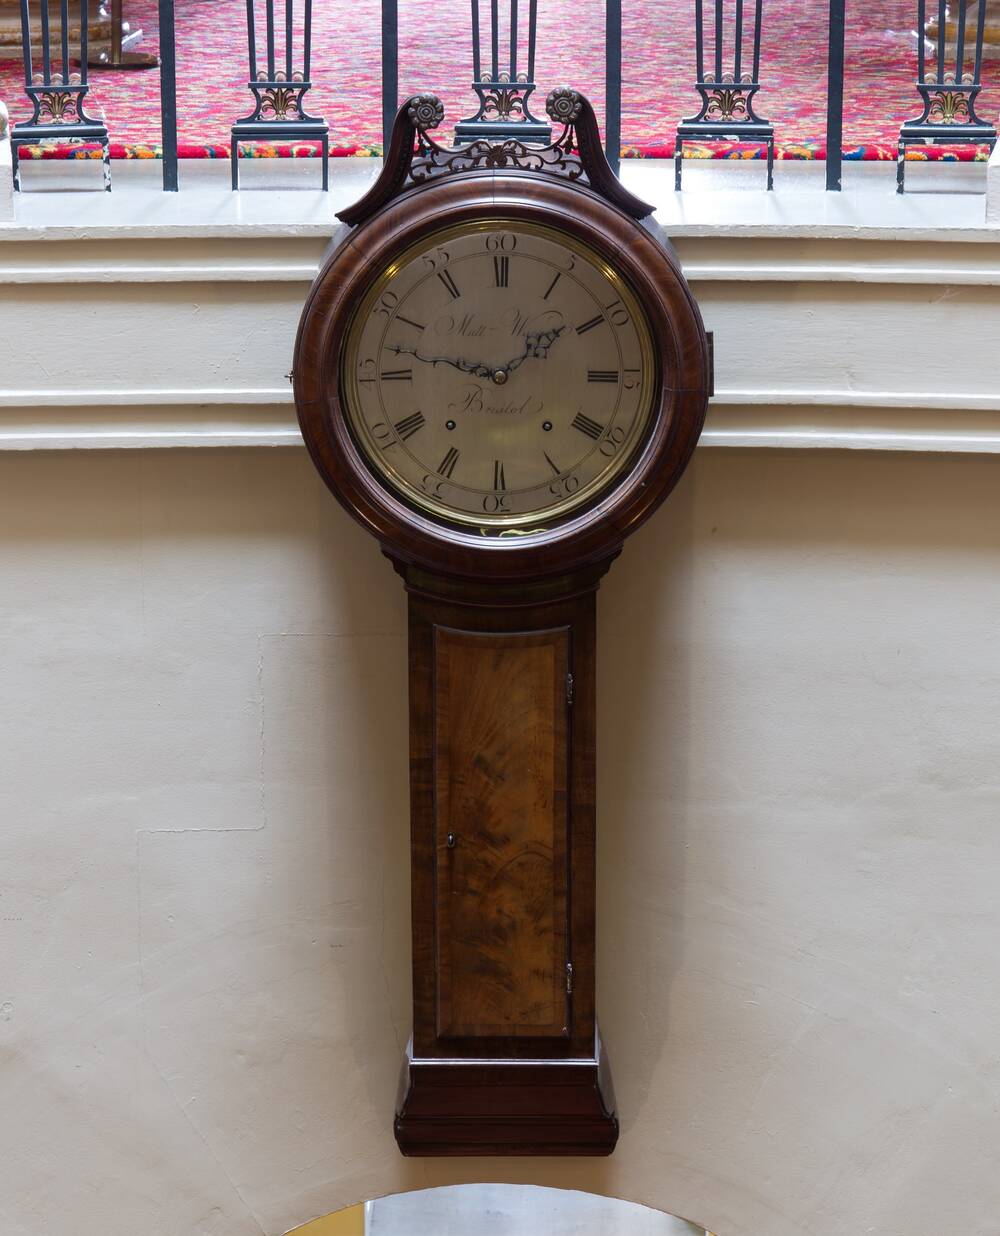 A wooden clock with the dial at the top and a long wooden tail hangs on a white wall, apparently attached to metal railings.